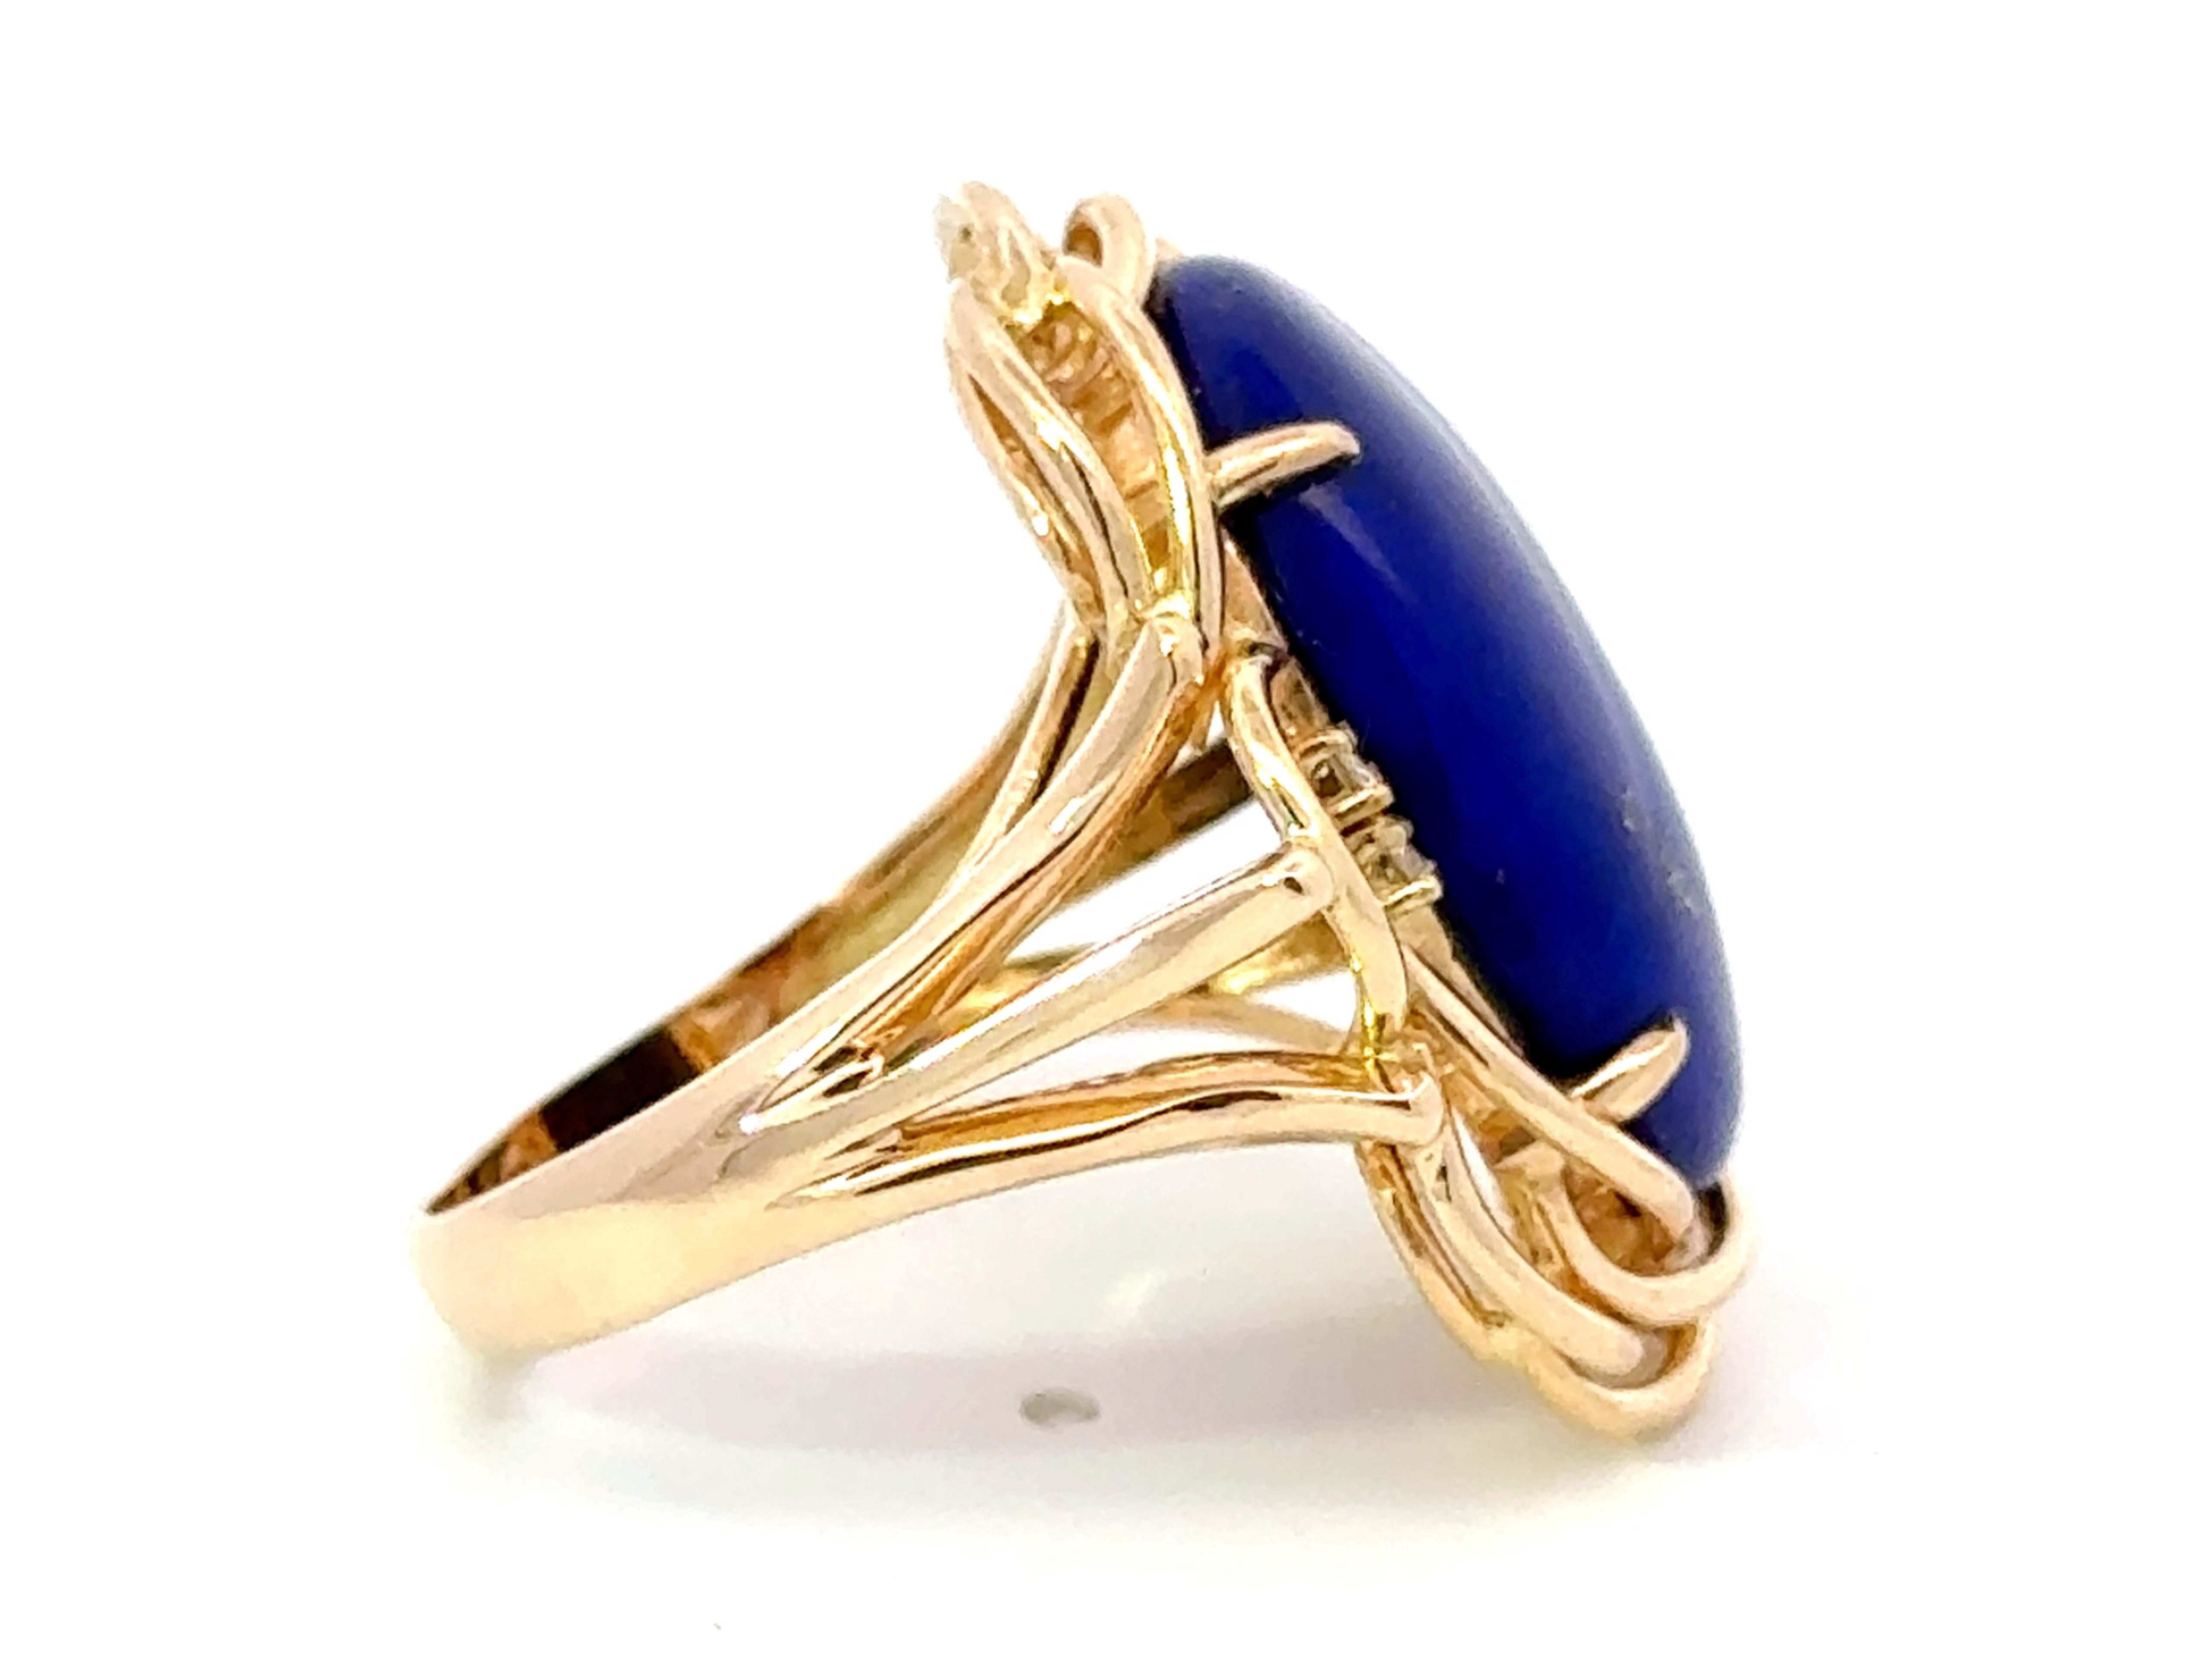 Large Oval Lapis Lazuli Diamond Cocktail Ring 14k Yellow Gold In Excellent Condition For Sale In Honolulu, HI